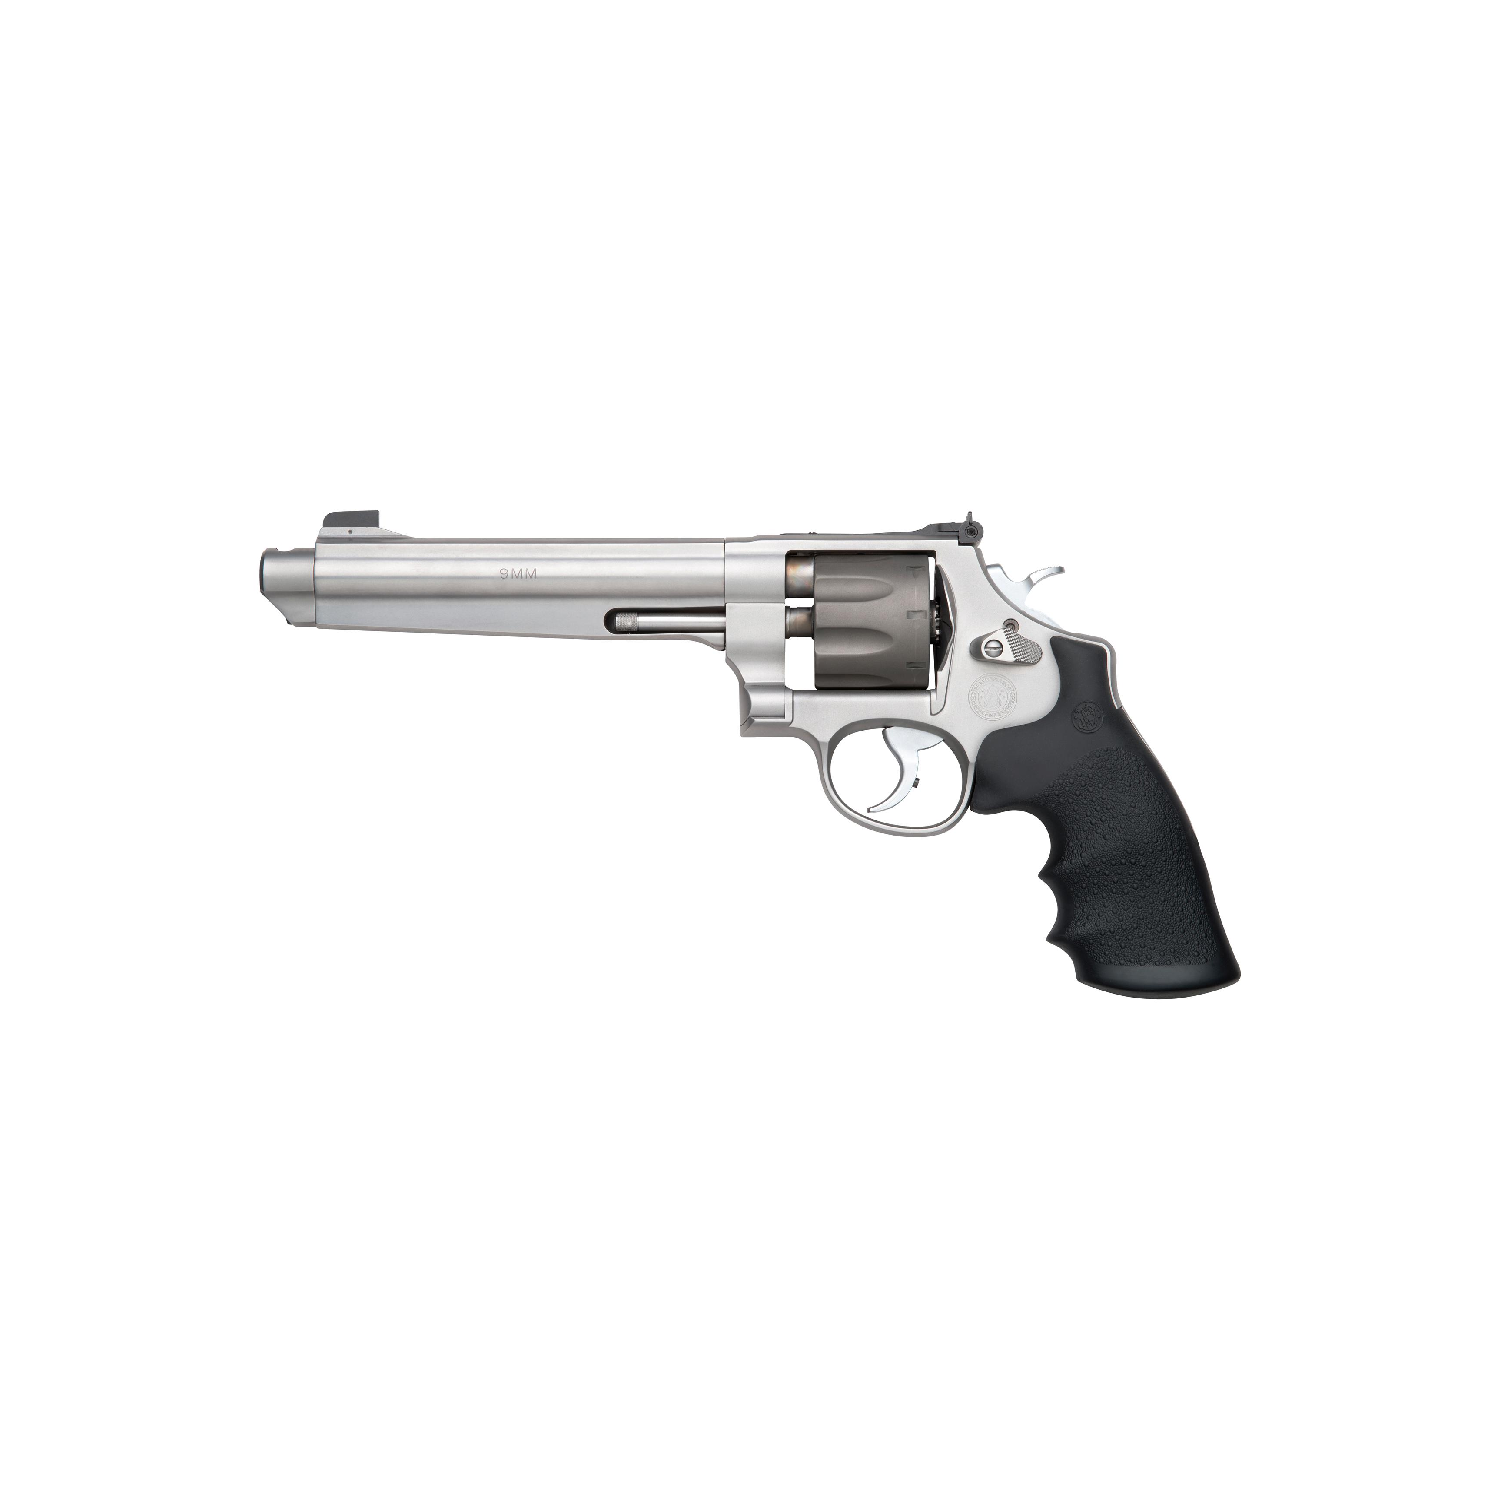 Smith & Wesson Mod. 929 PC Performance Center, 9 mm Luger Jerry Miculek Signature